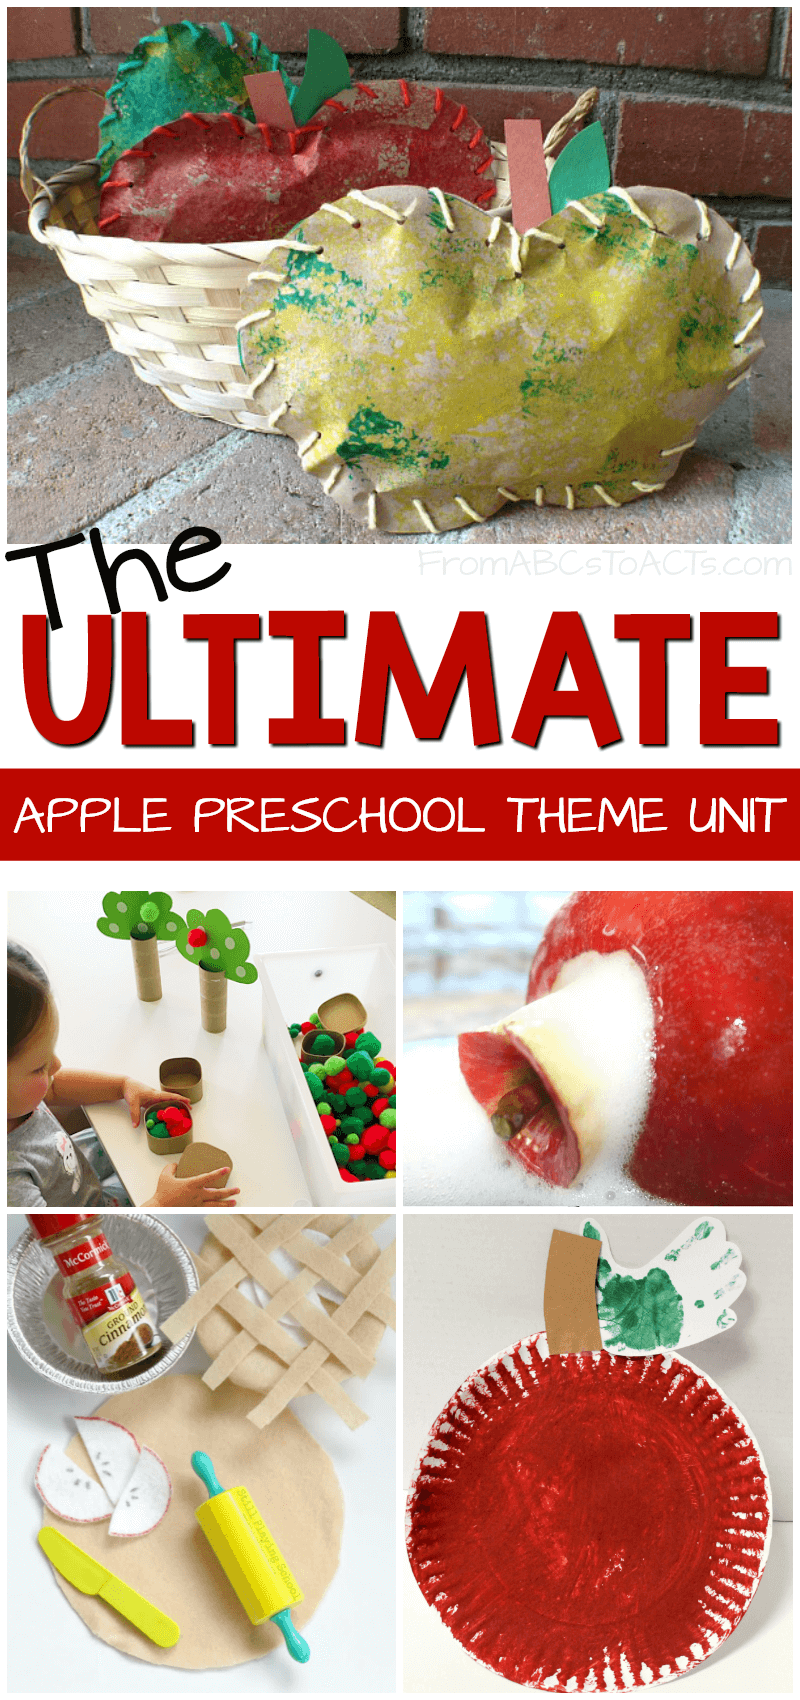 Create an amazing apple theme unit for preschoolers or kindergartners! This post has more than 50 ideas covering fine and gross motor activities, sensory play, literacy, math, and more!